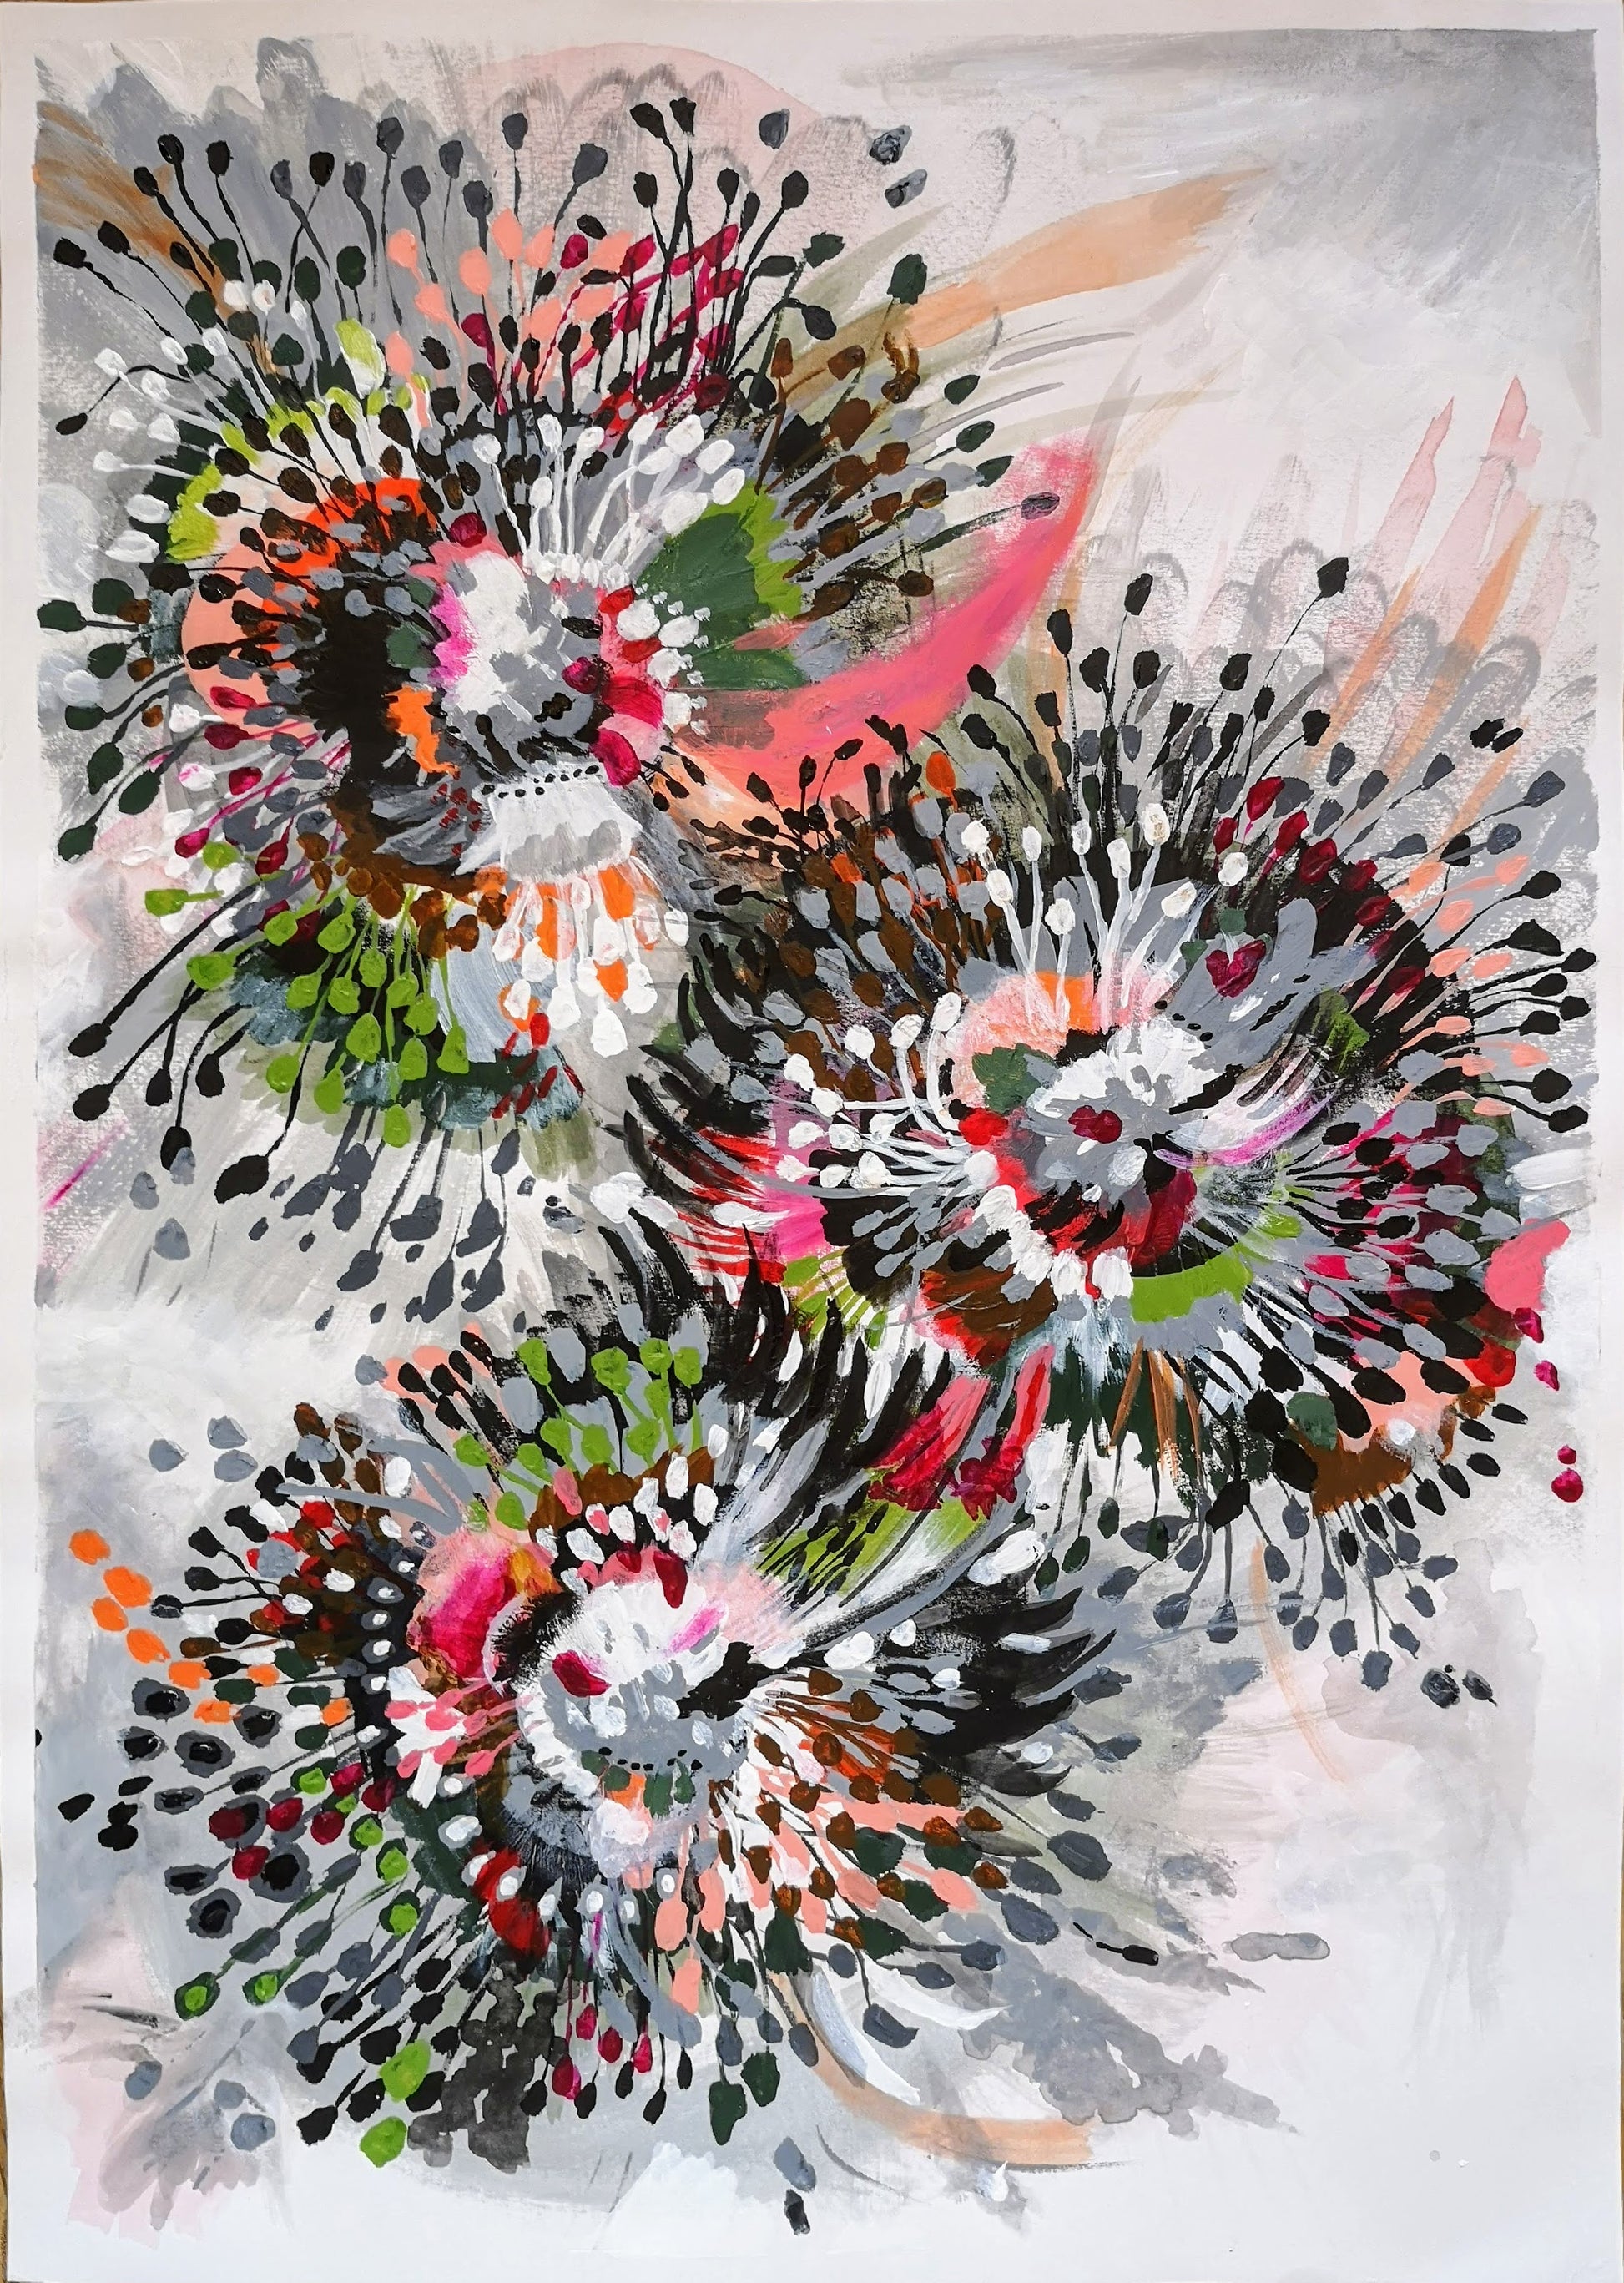 Original Acrylic painting on paper by Judy Century Art. Inspired by flowers, this painting is full of movement and energy, called spokes and spikes. Featuring grey, green, pink, black, brown, peach and white.